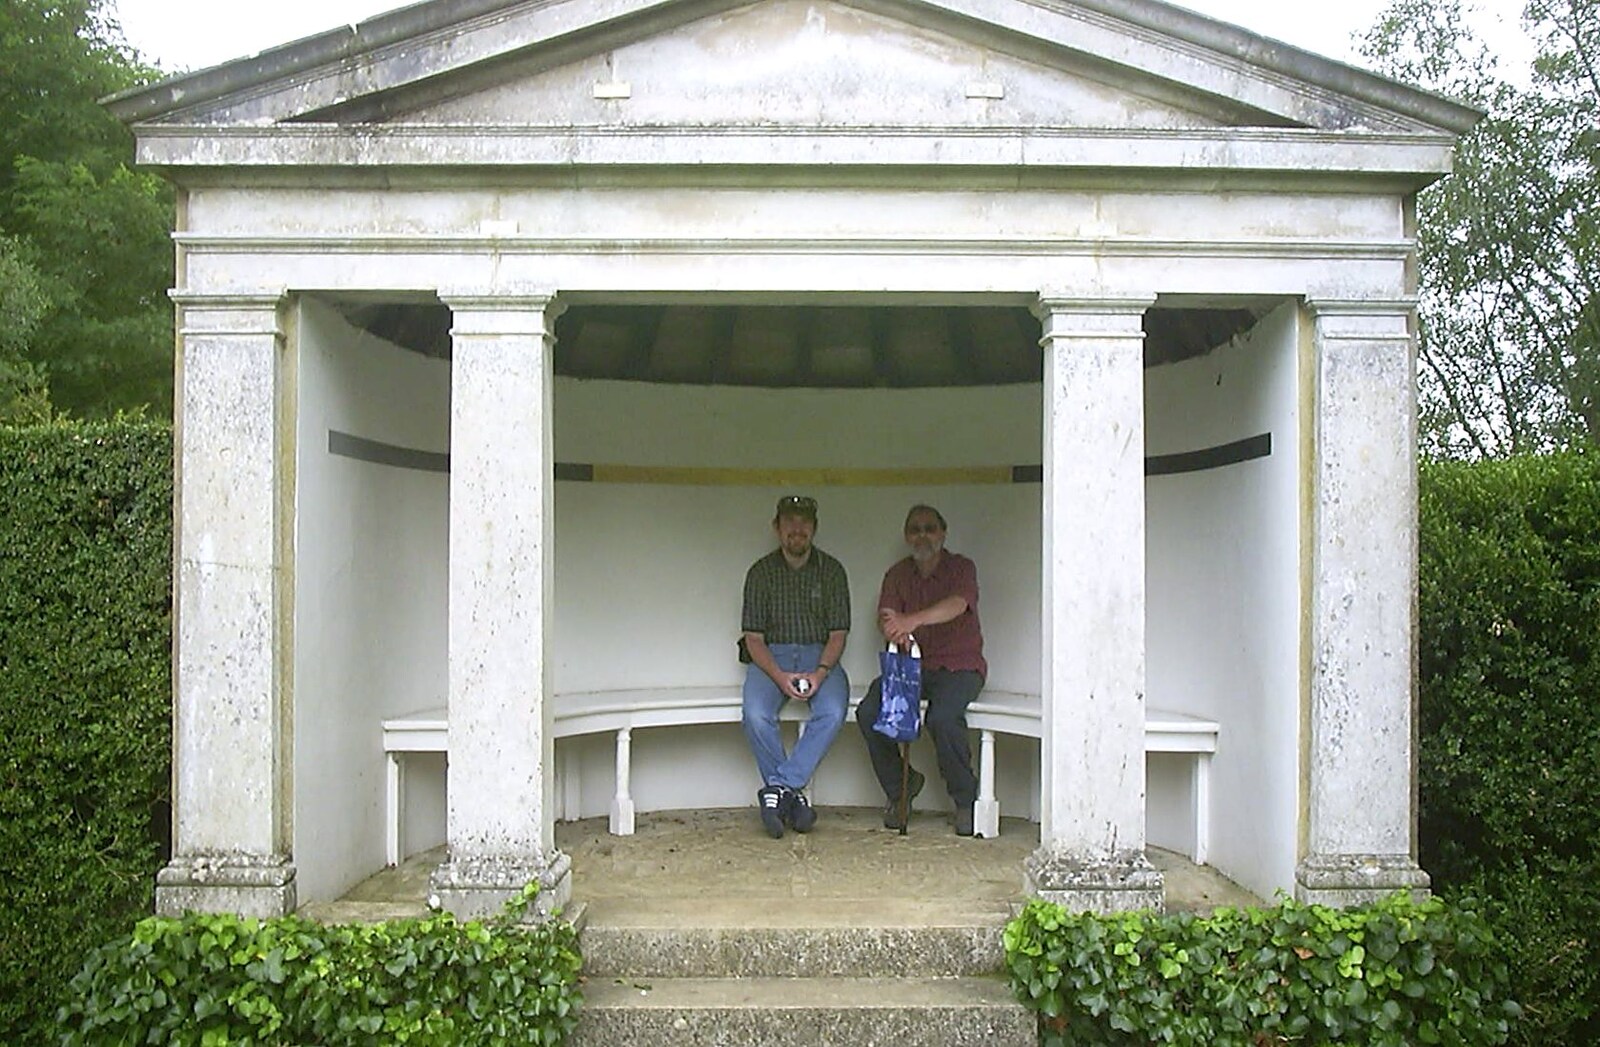 Dave and Robbie on a stone bench from A Trip to Ickworth House, Horringer, Suffolk - 22nd August 2004